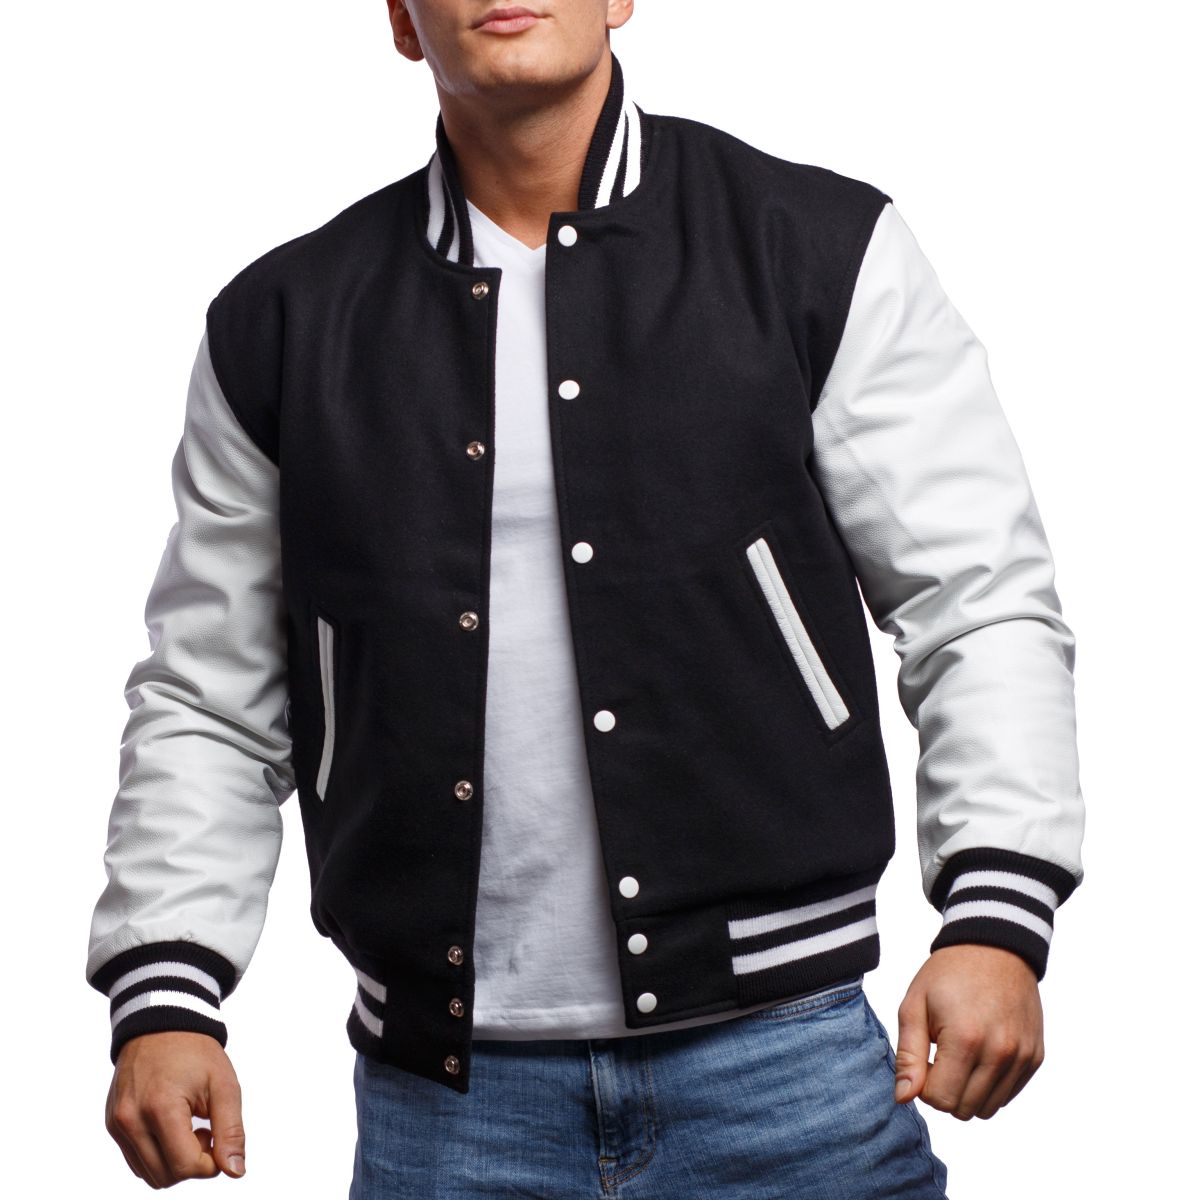 Black Letterman Jacket With White Leather Sleeves | lacienciadelcafe.com.ar